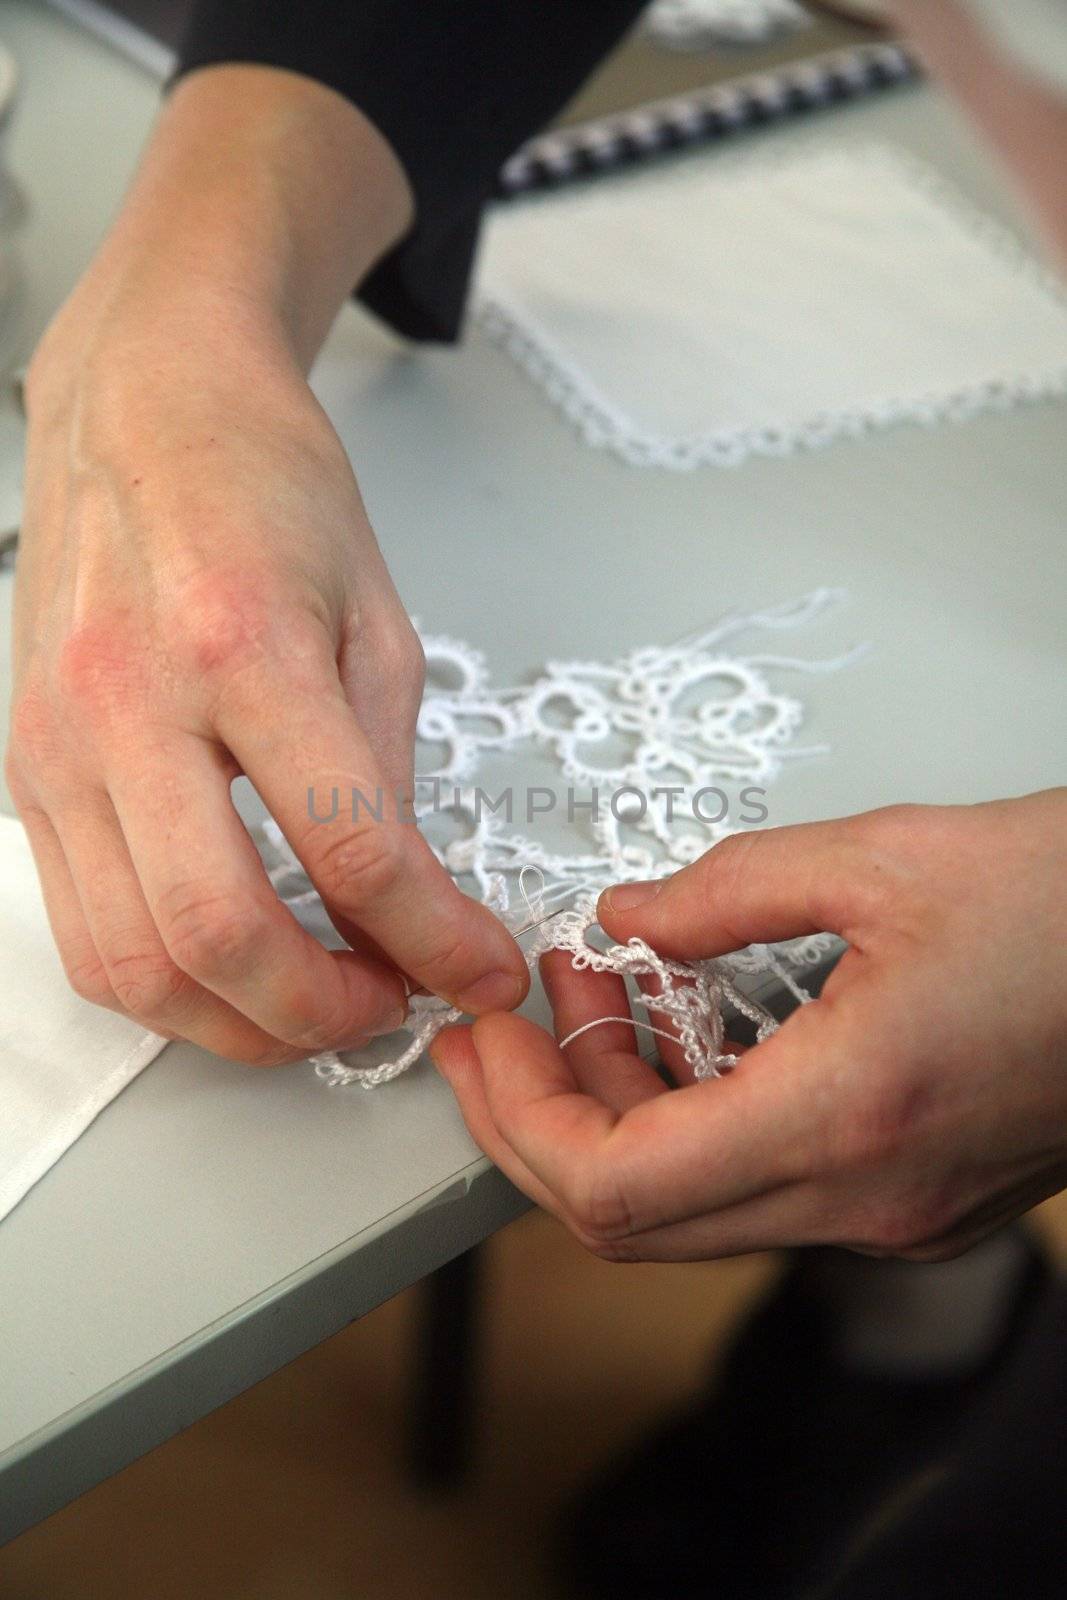 Process of lace-making by atlas